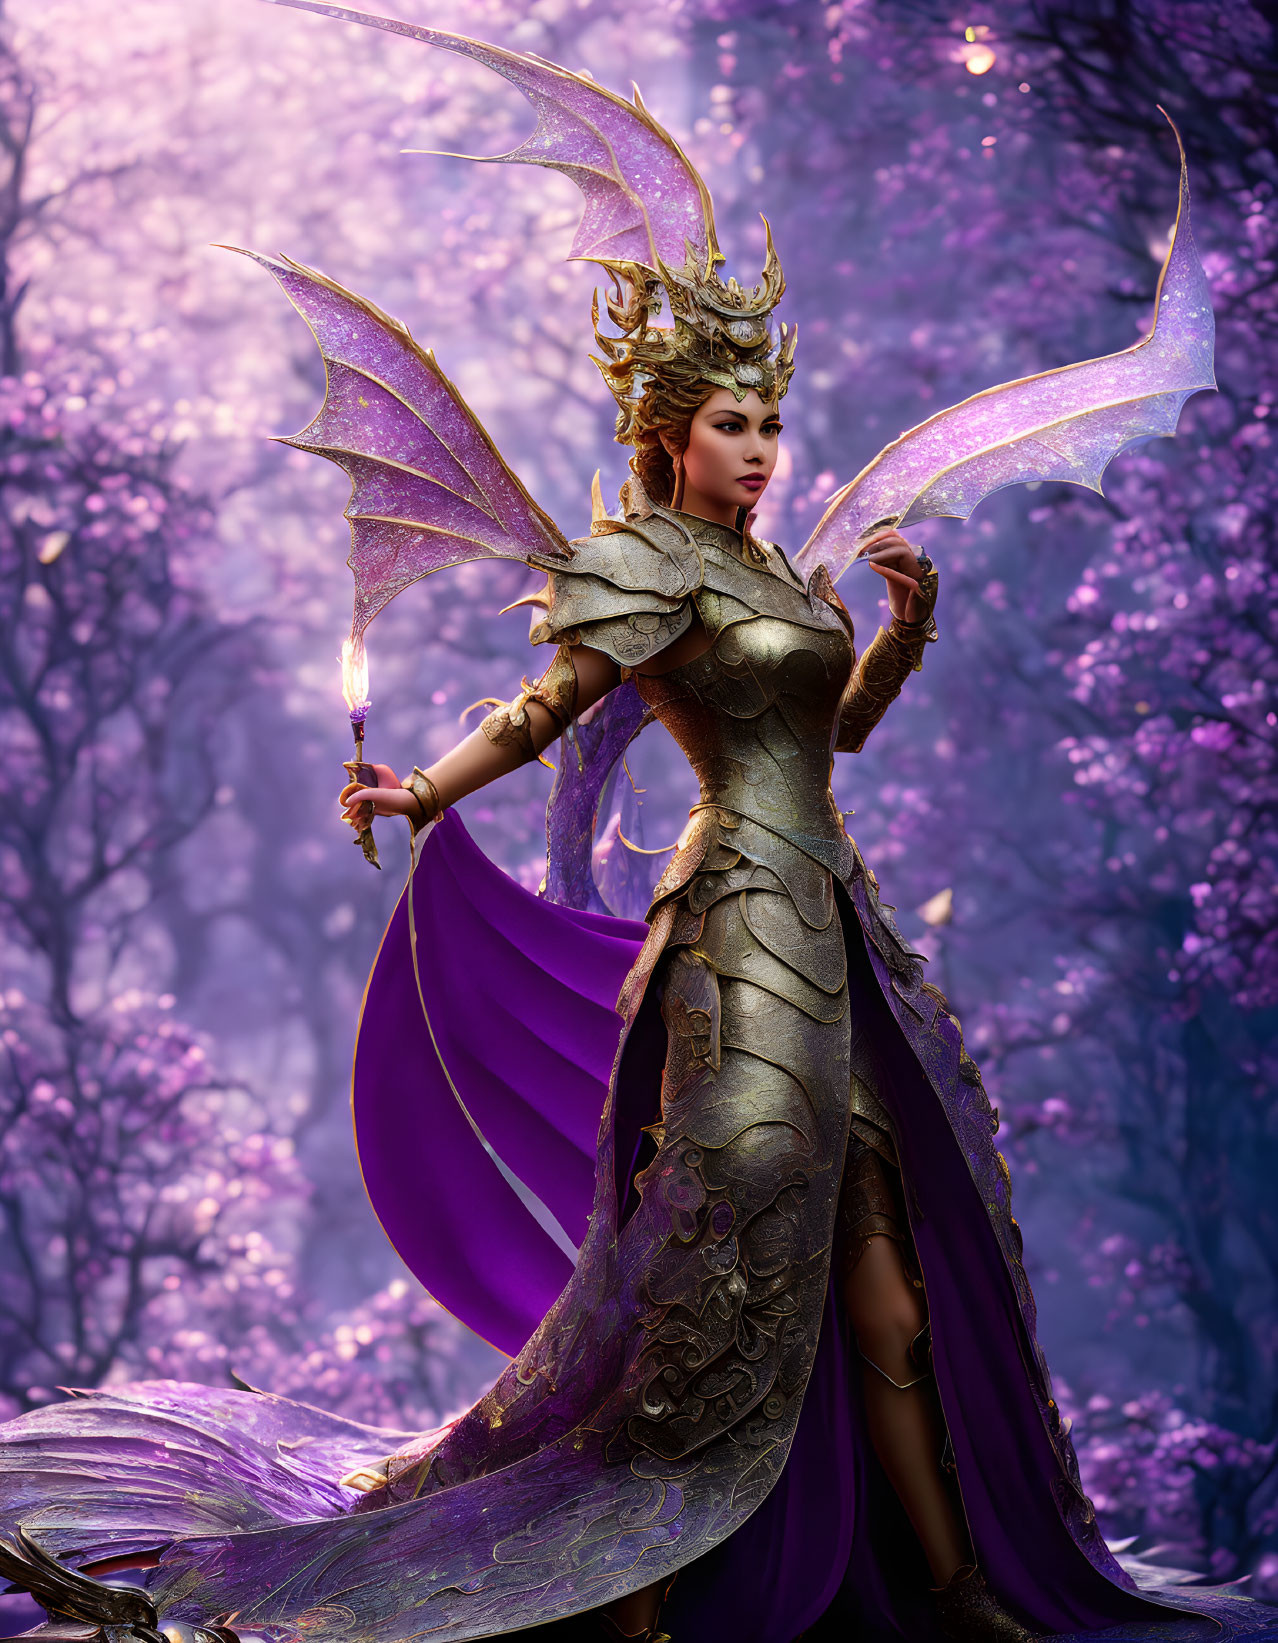 Golden-armored fantasy character with dragon wings in regal setting.